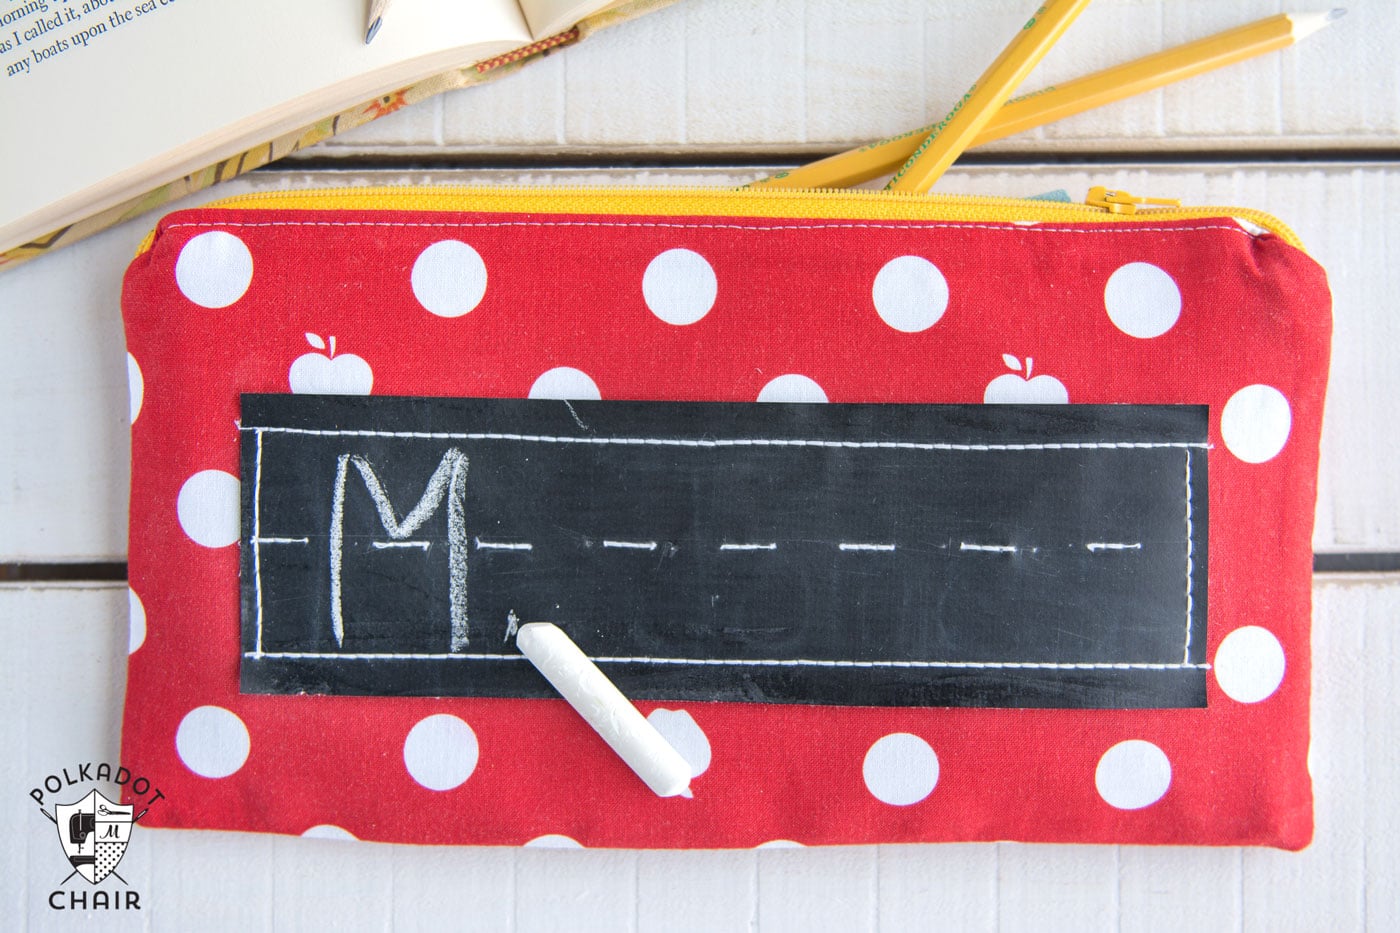 Cute pencil pouch sewing pattern, love the addition of chalkboard fabric to the front 